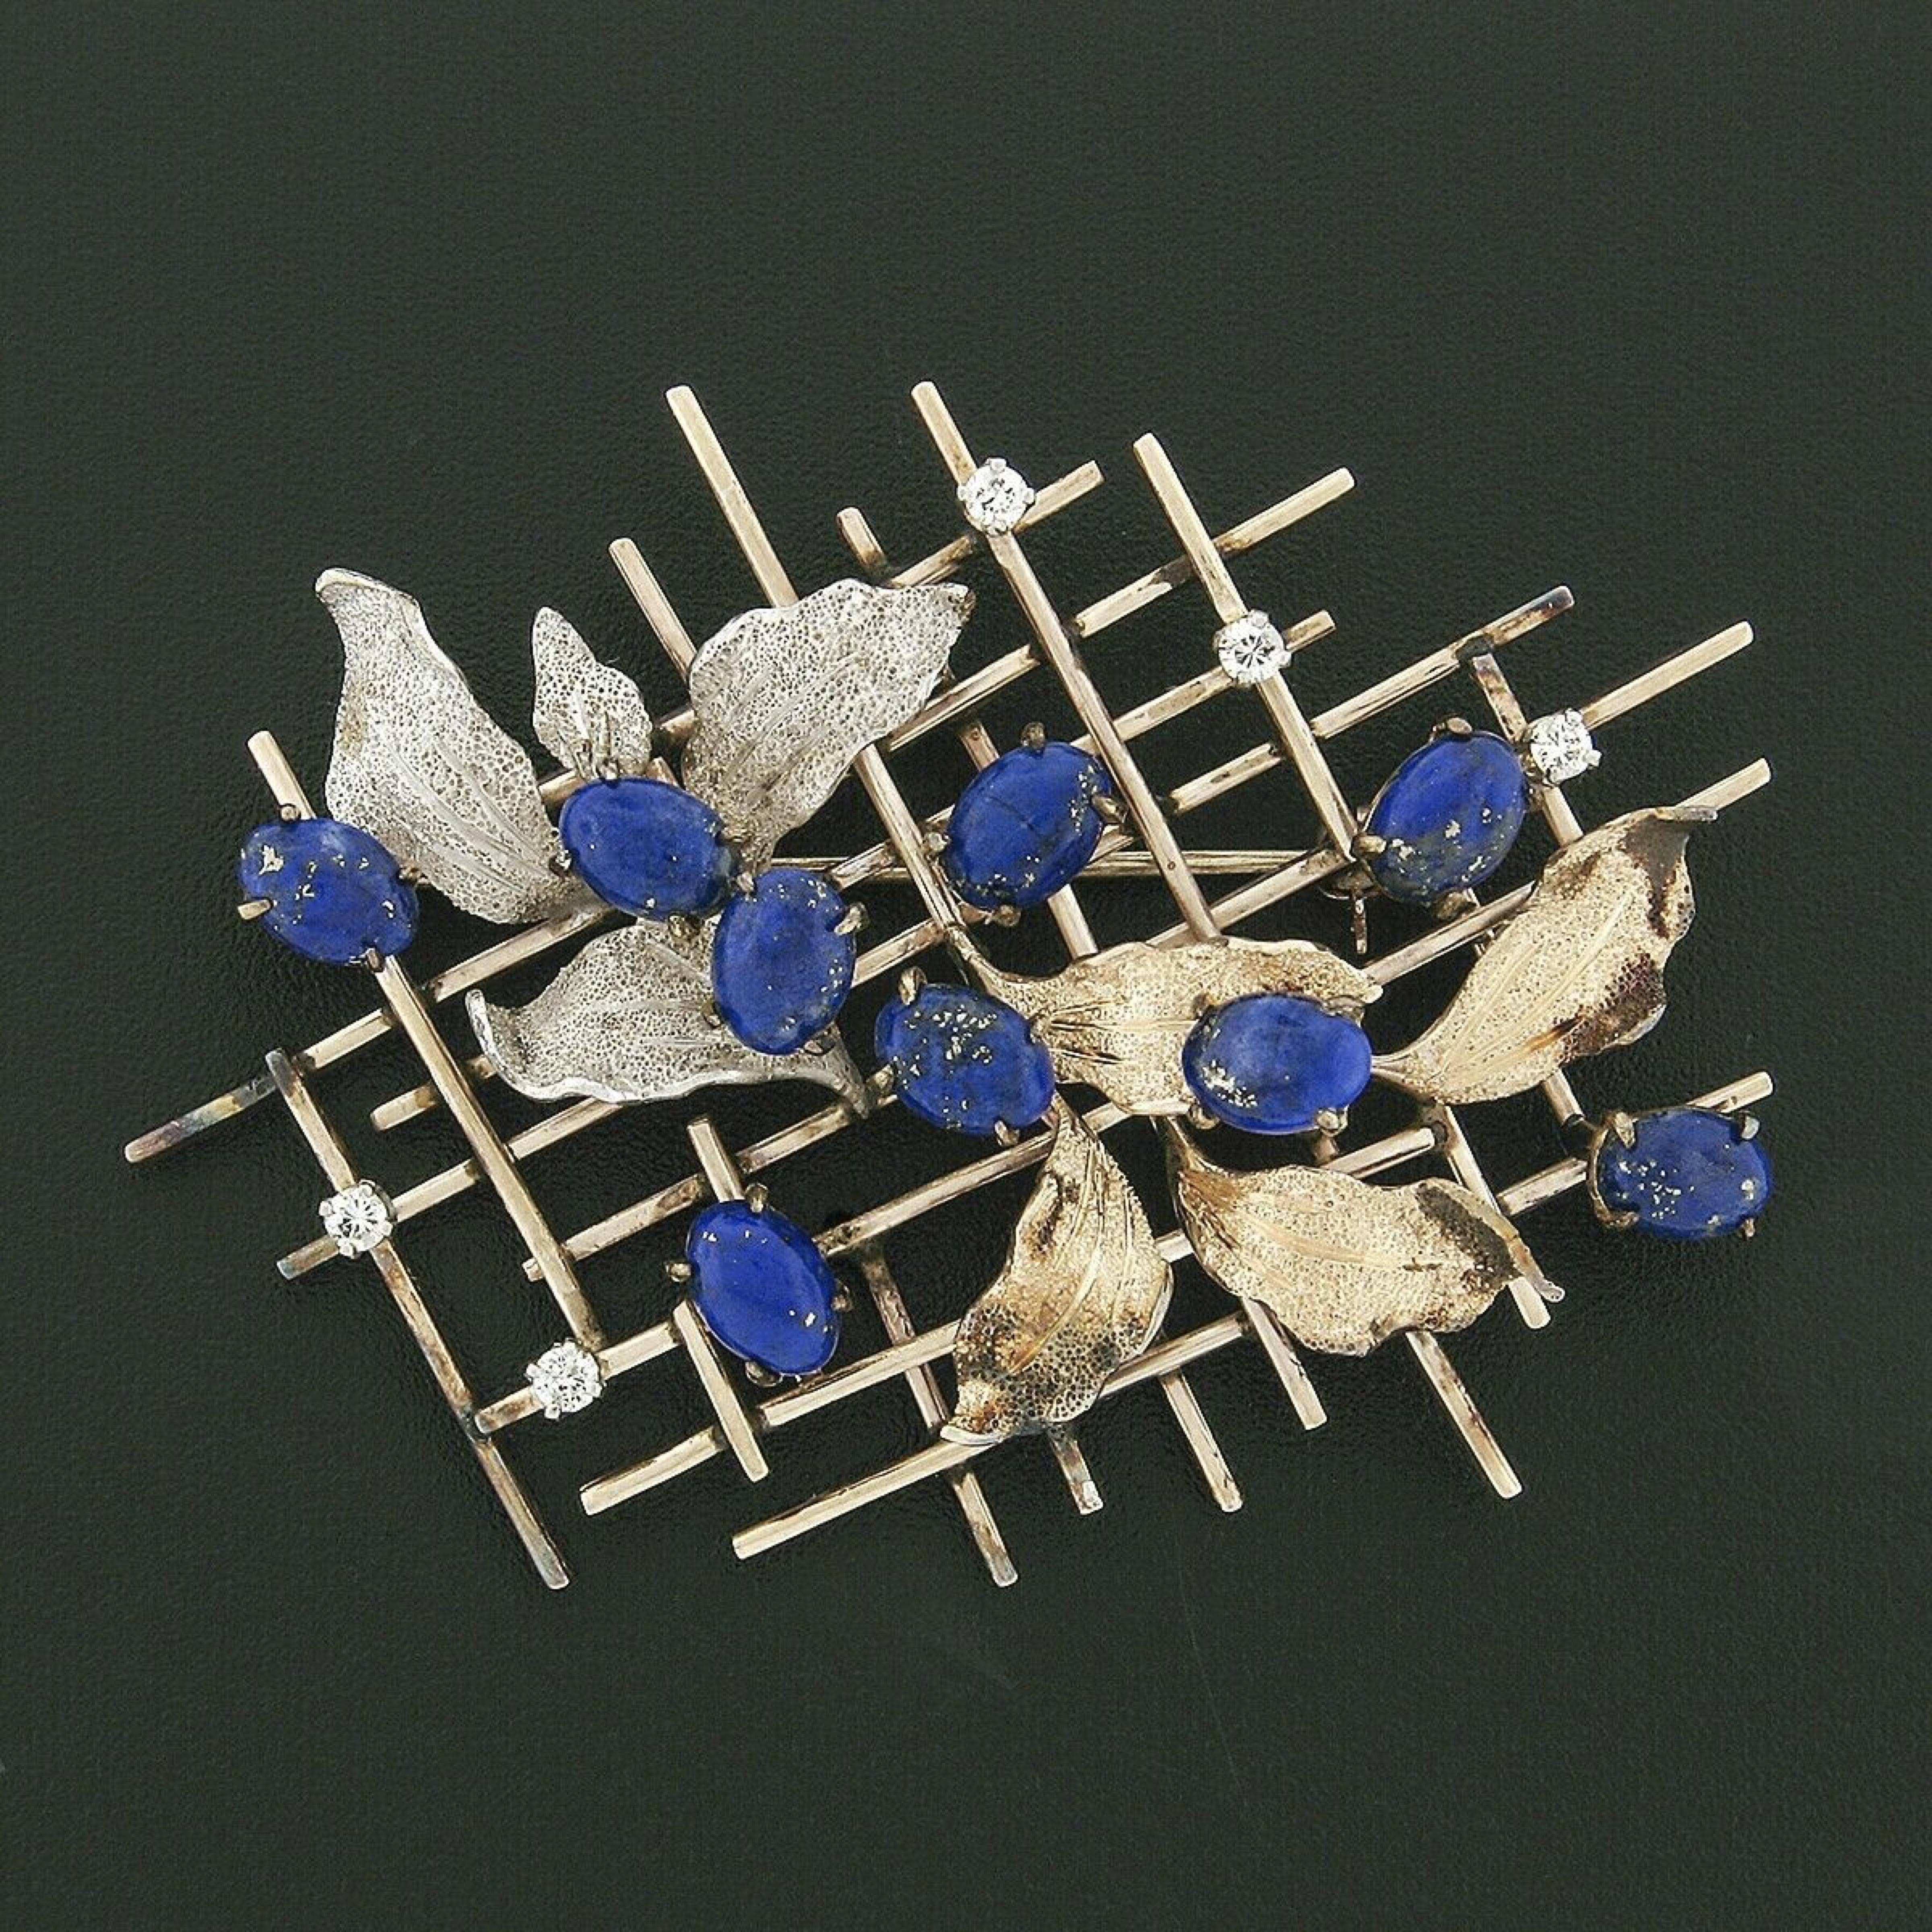 This unique and large vintage brooch/pin is well crafted in solid 14k yellow, white, and rose gold featuring lapis and diamonds on an open grid design with textured leaves throughout. The leaves and the blue lapis stones are placed throughout the